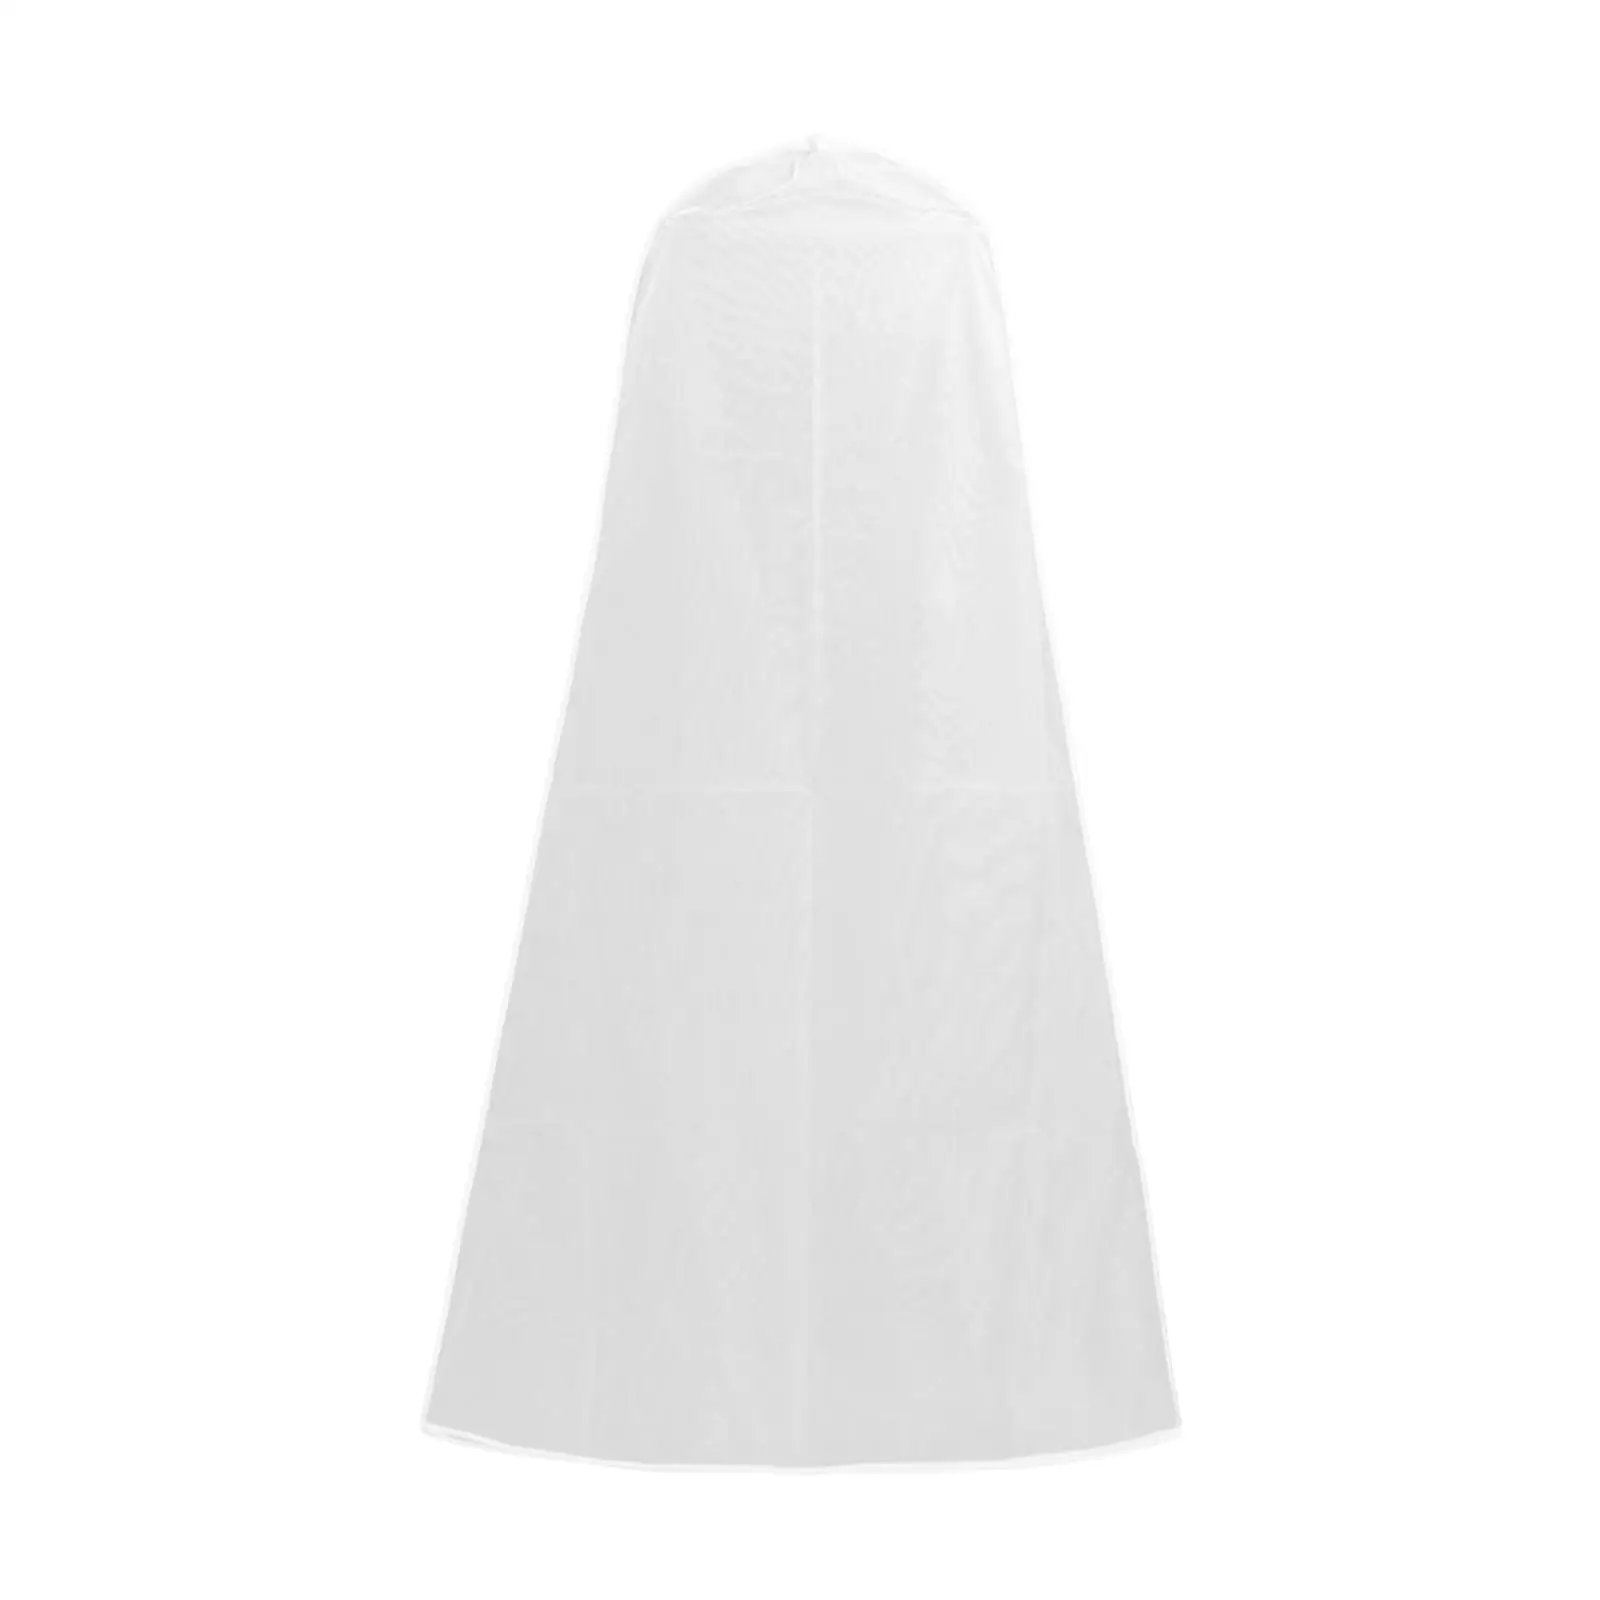 Pullover Wedding Dress Garment Bag Cover Washable Storage Bag Dustproof Covers for Evening Gown Windbreakers Down Jackets